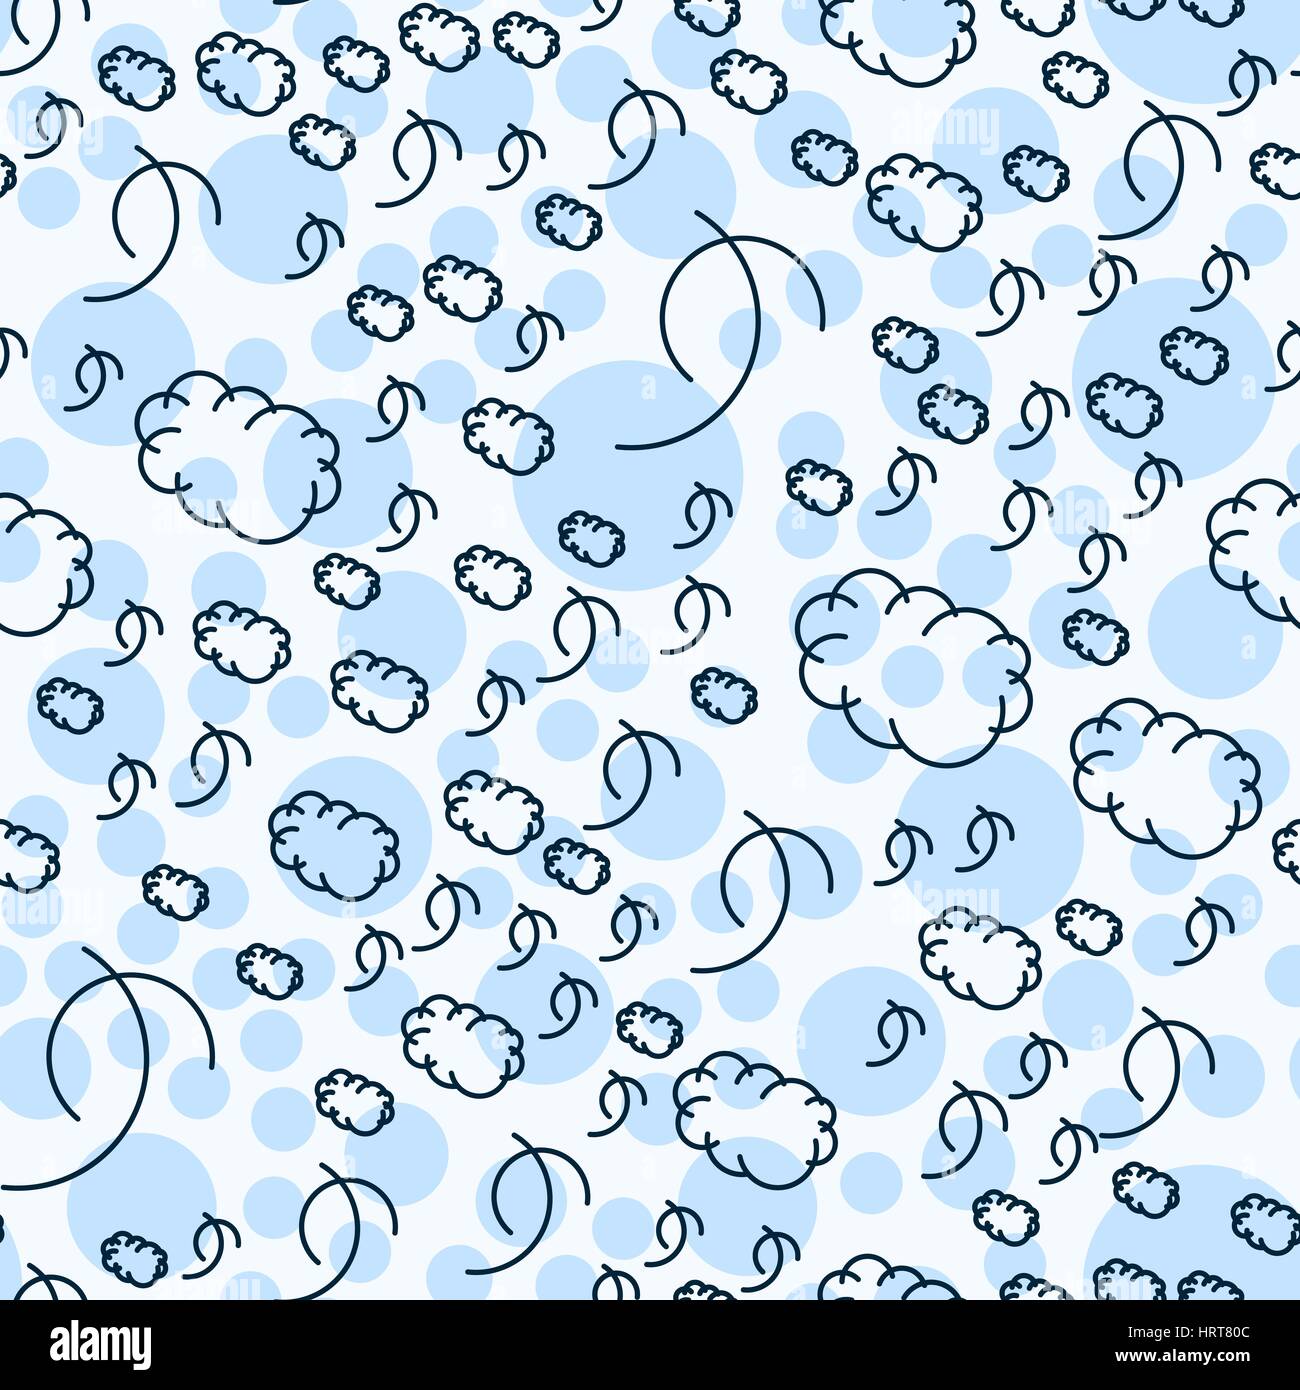 Abstract clouds sky seamless pattern. Vector illustration. Curly cartoon repeating shapes. Stock Vector